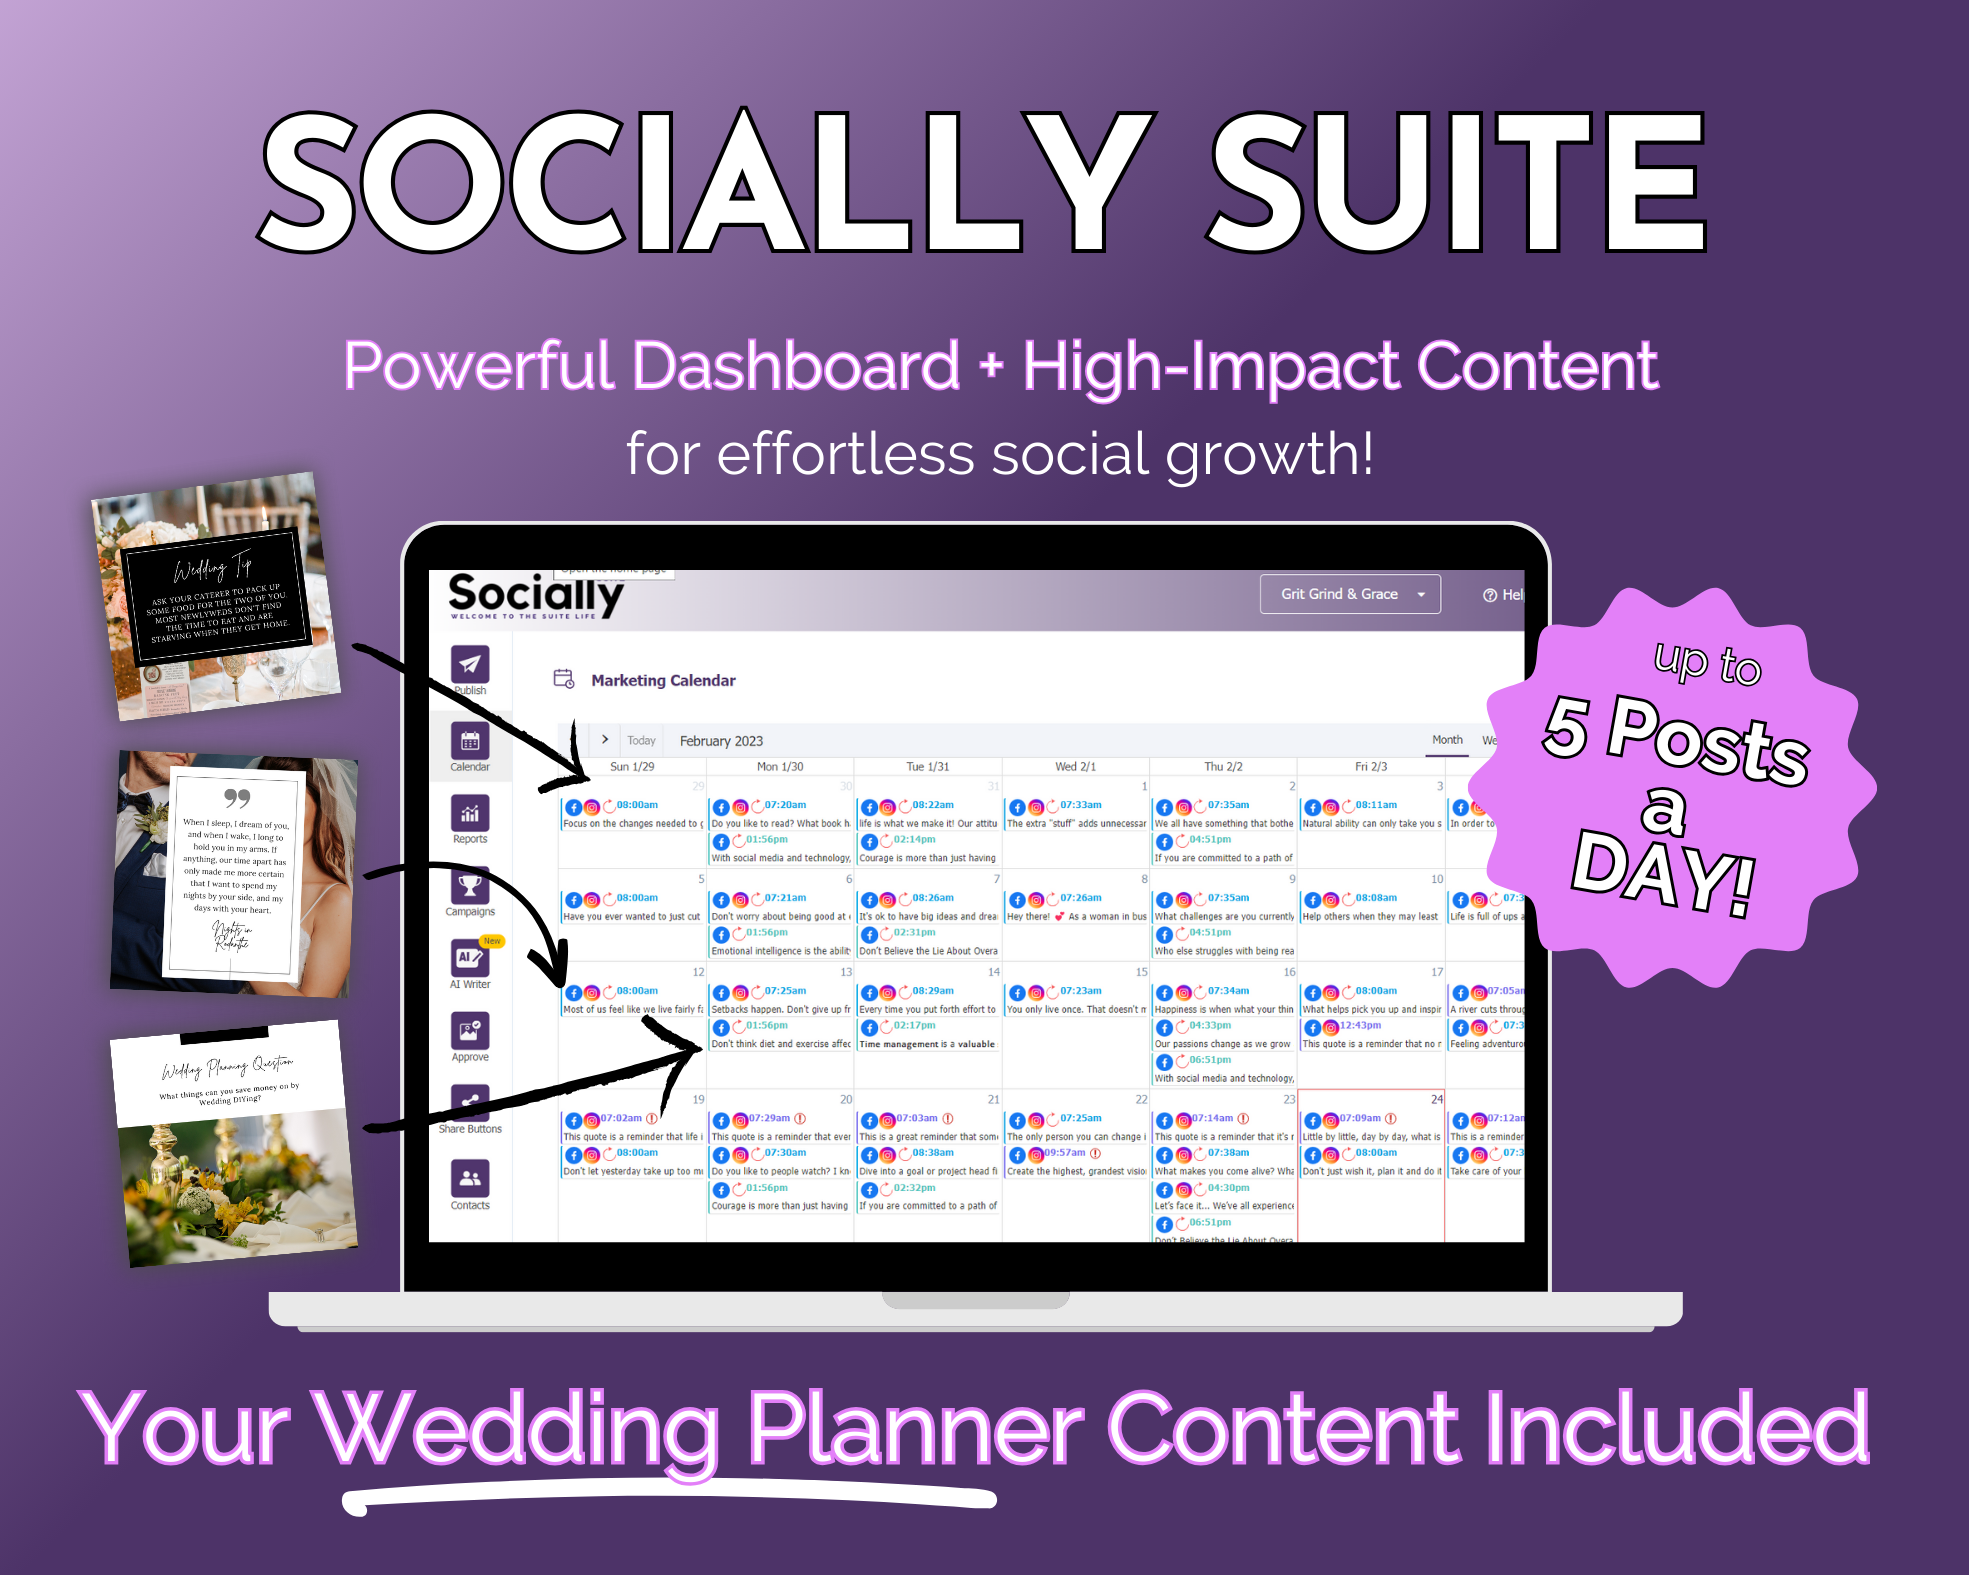 Promotional graphic for "Get Socially Inclined's Socially Suite Membership," featuring a content dashboard tailored to social media marketing with a focus on wedding planner online presence, highlighting the capability to schedule up to 5 posts a day.